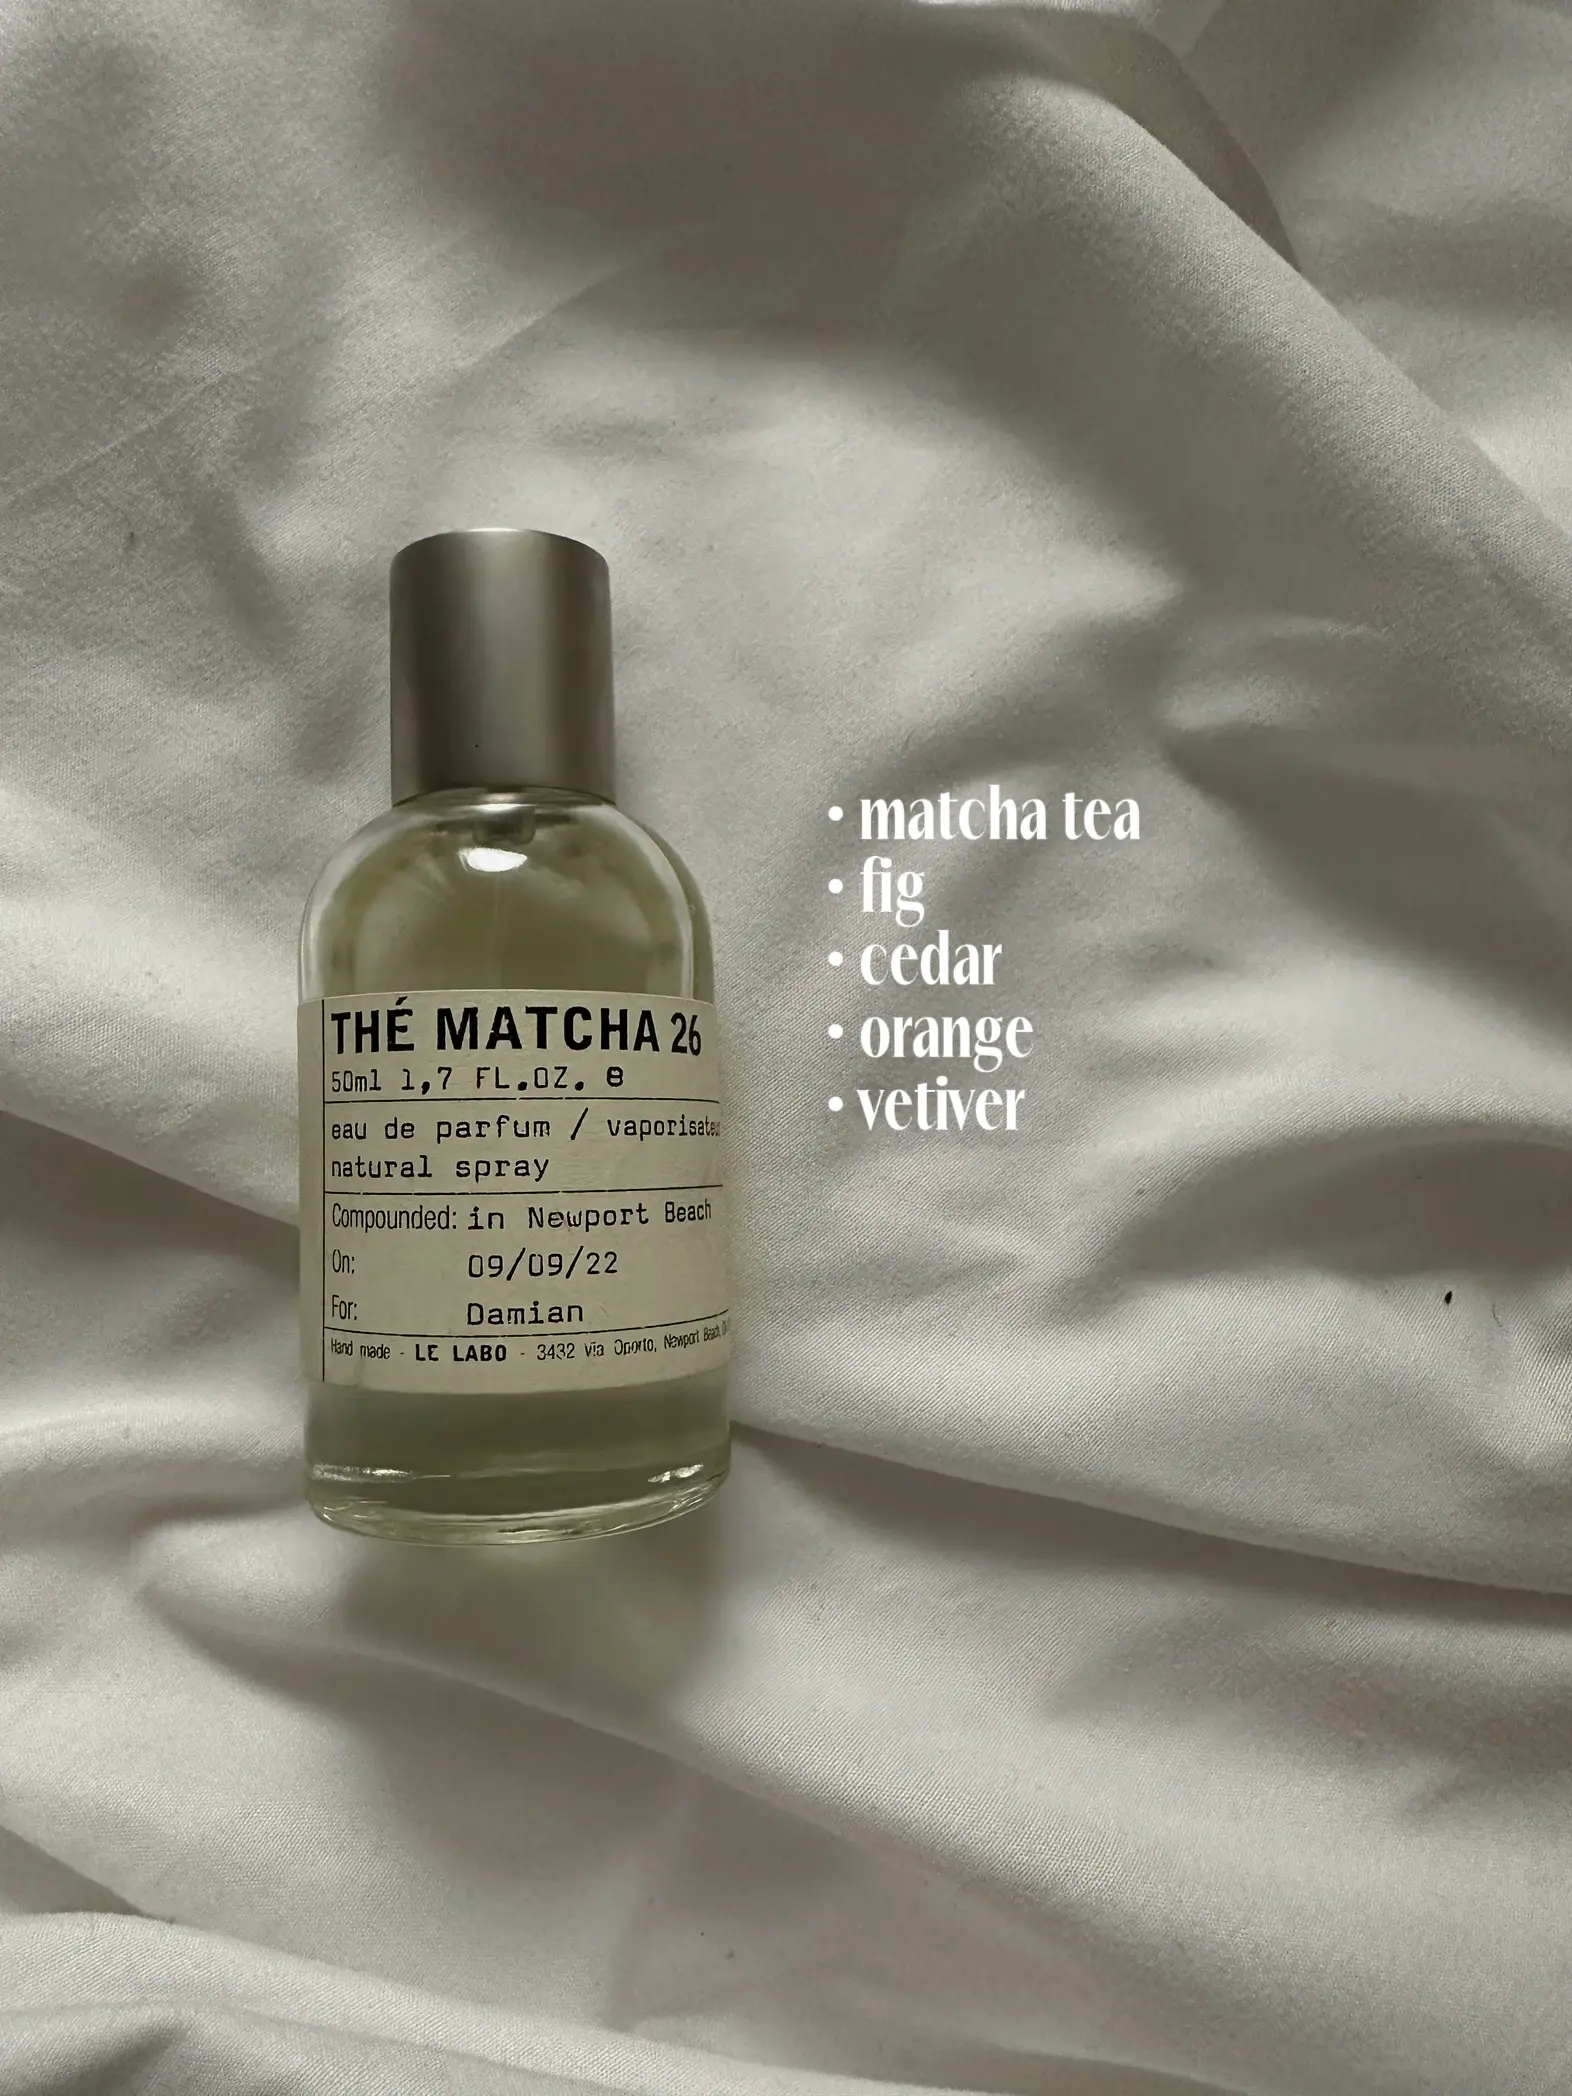 my favorite scents from Le Labo | Gallery posted by sandradamian